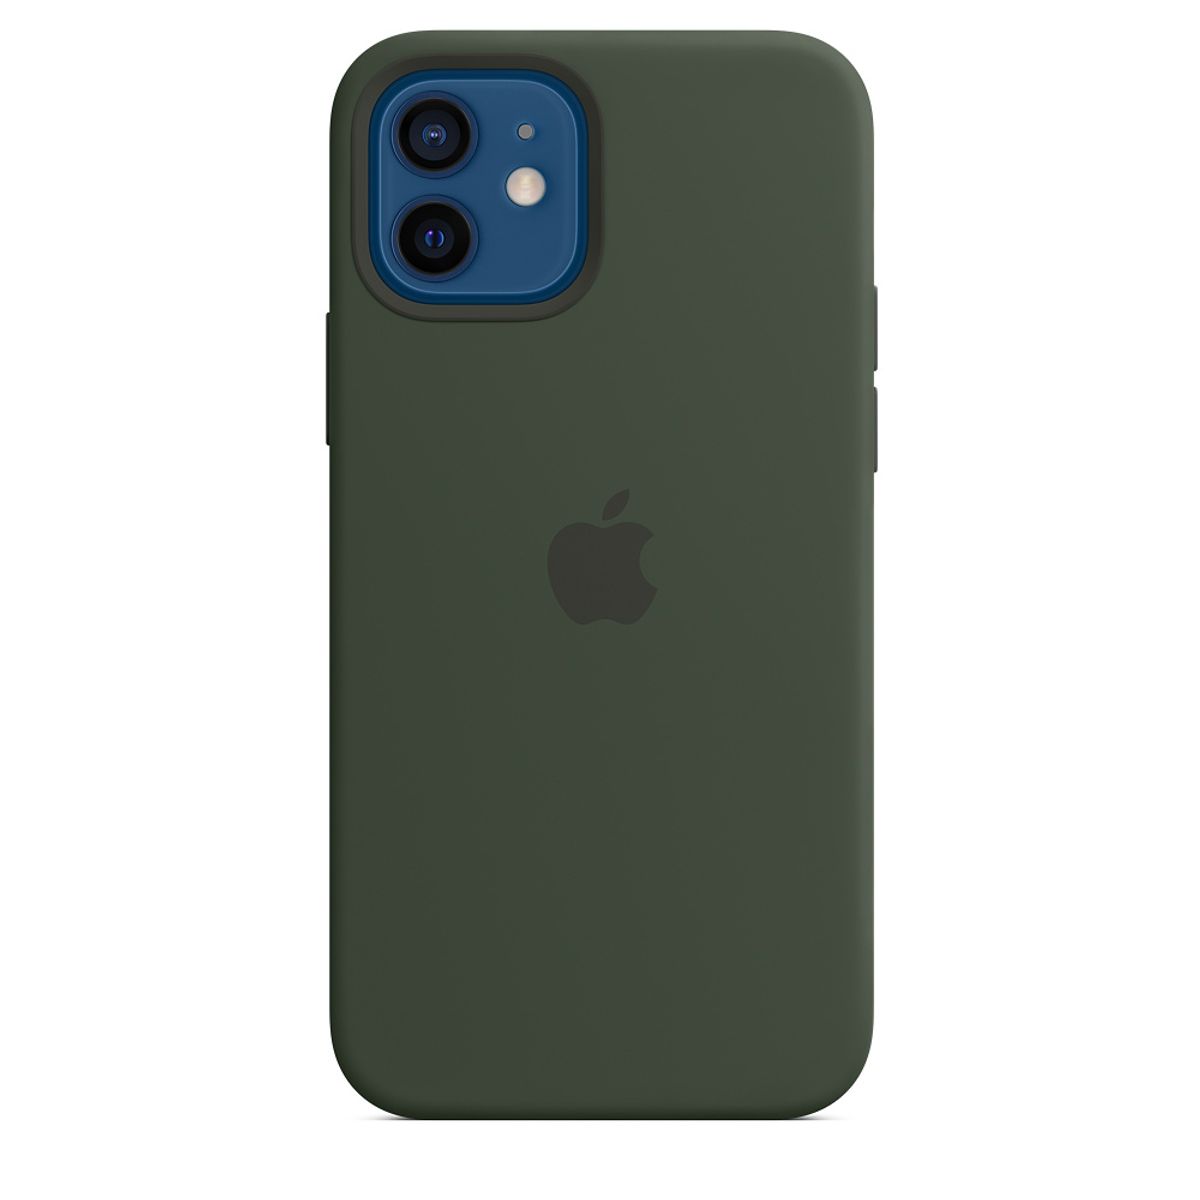 Capa para iPhone 12 / 12 Pro Apple Silicone Verde Chipre - Ibyte